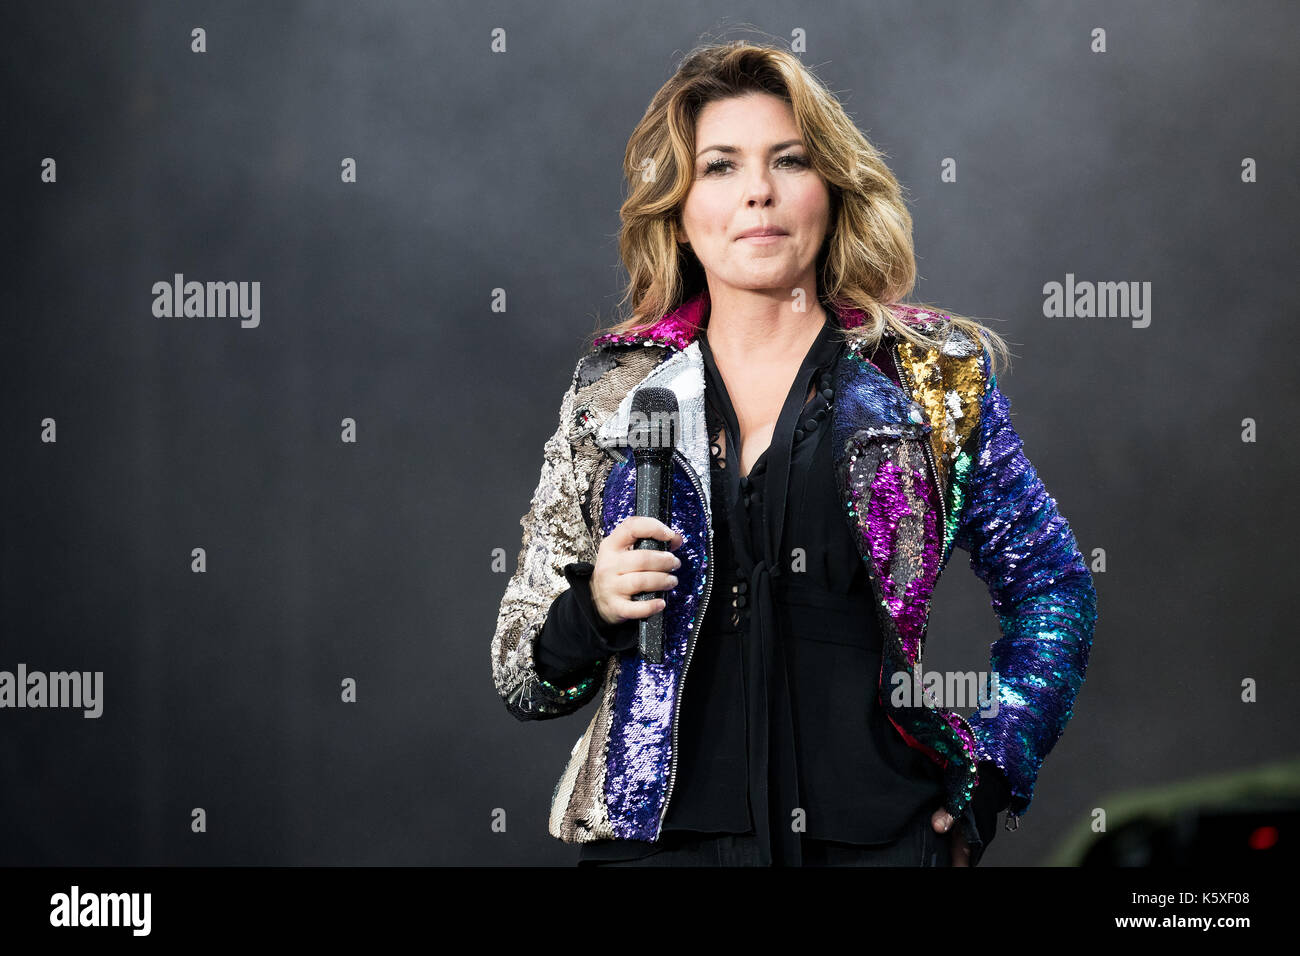 London, England. 9th September 2017, Singer Shania Twain performs for the first time in 15 years in the UK During Radio 2 Live in Hyde Park 2017 on September 10, 2017, London.  England.© Jason Richardson / Alamy Live News Stock Photo